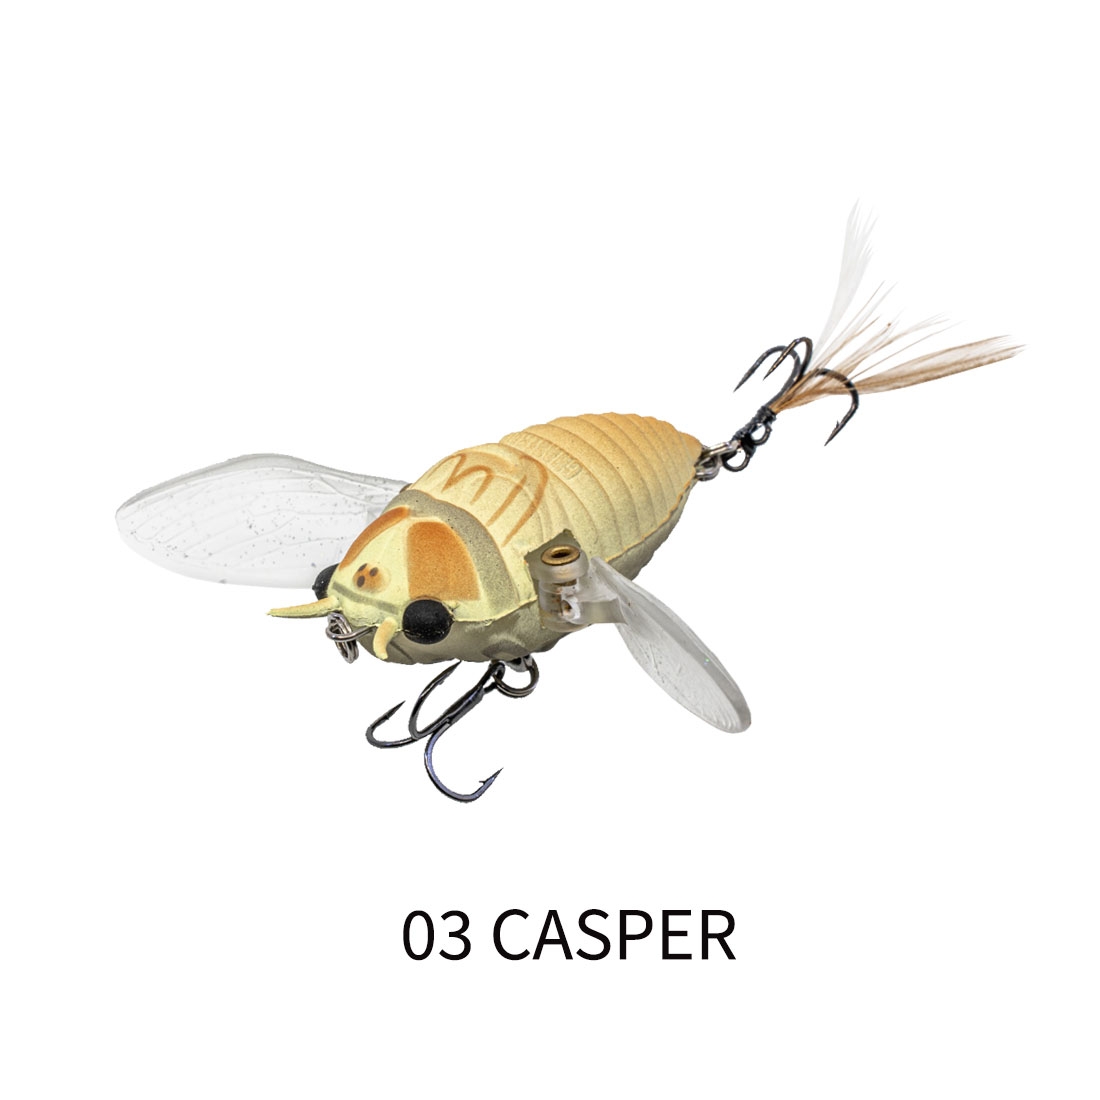 Chasebaits Ripple Cicada Soft Body Surface Fishing Lure @ Otto's TW